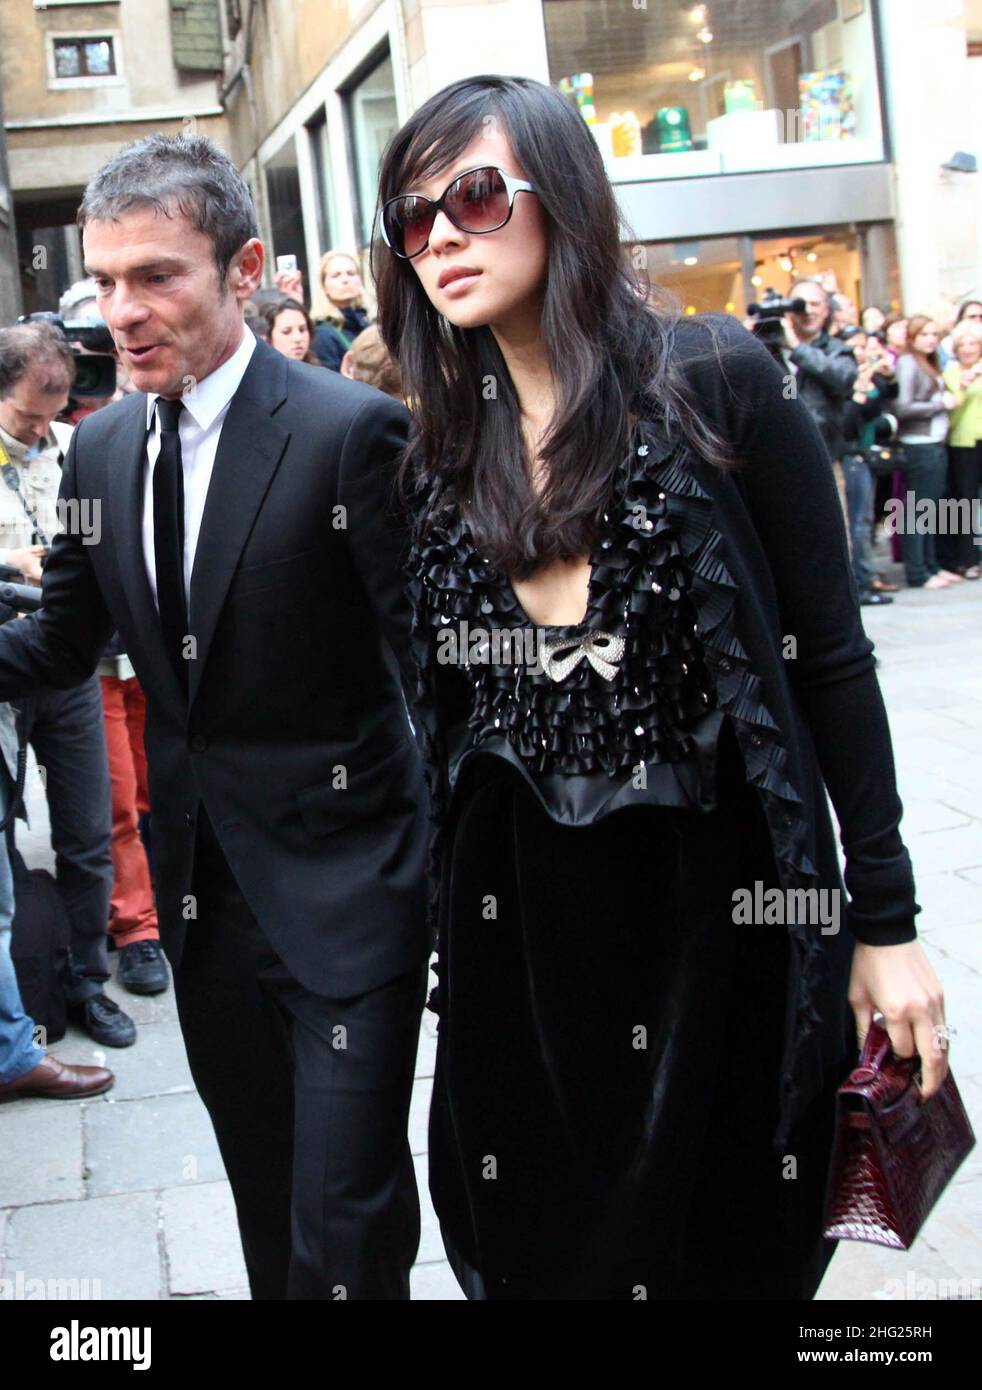 Chinese star Zhang Ziyi arrives for the wedding ceremony of actress Salma Hayek and businessman Francois-Henri Pinault at the 'La Fenice' Theatre, in Venice, Italy on Saturday, April 25, 2009. Stock Photo